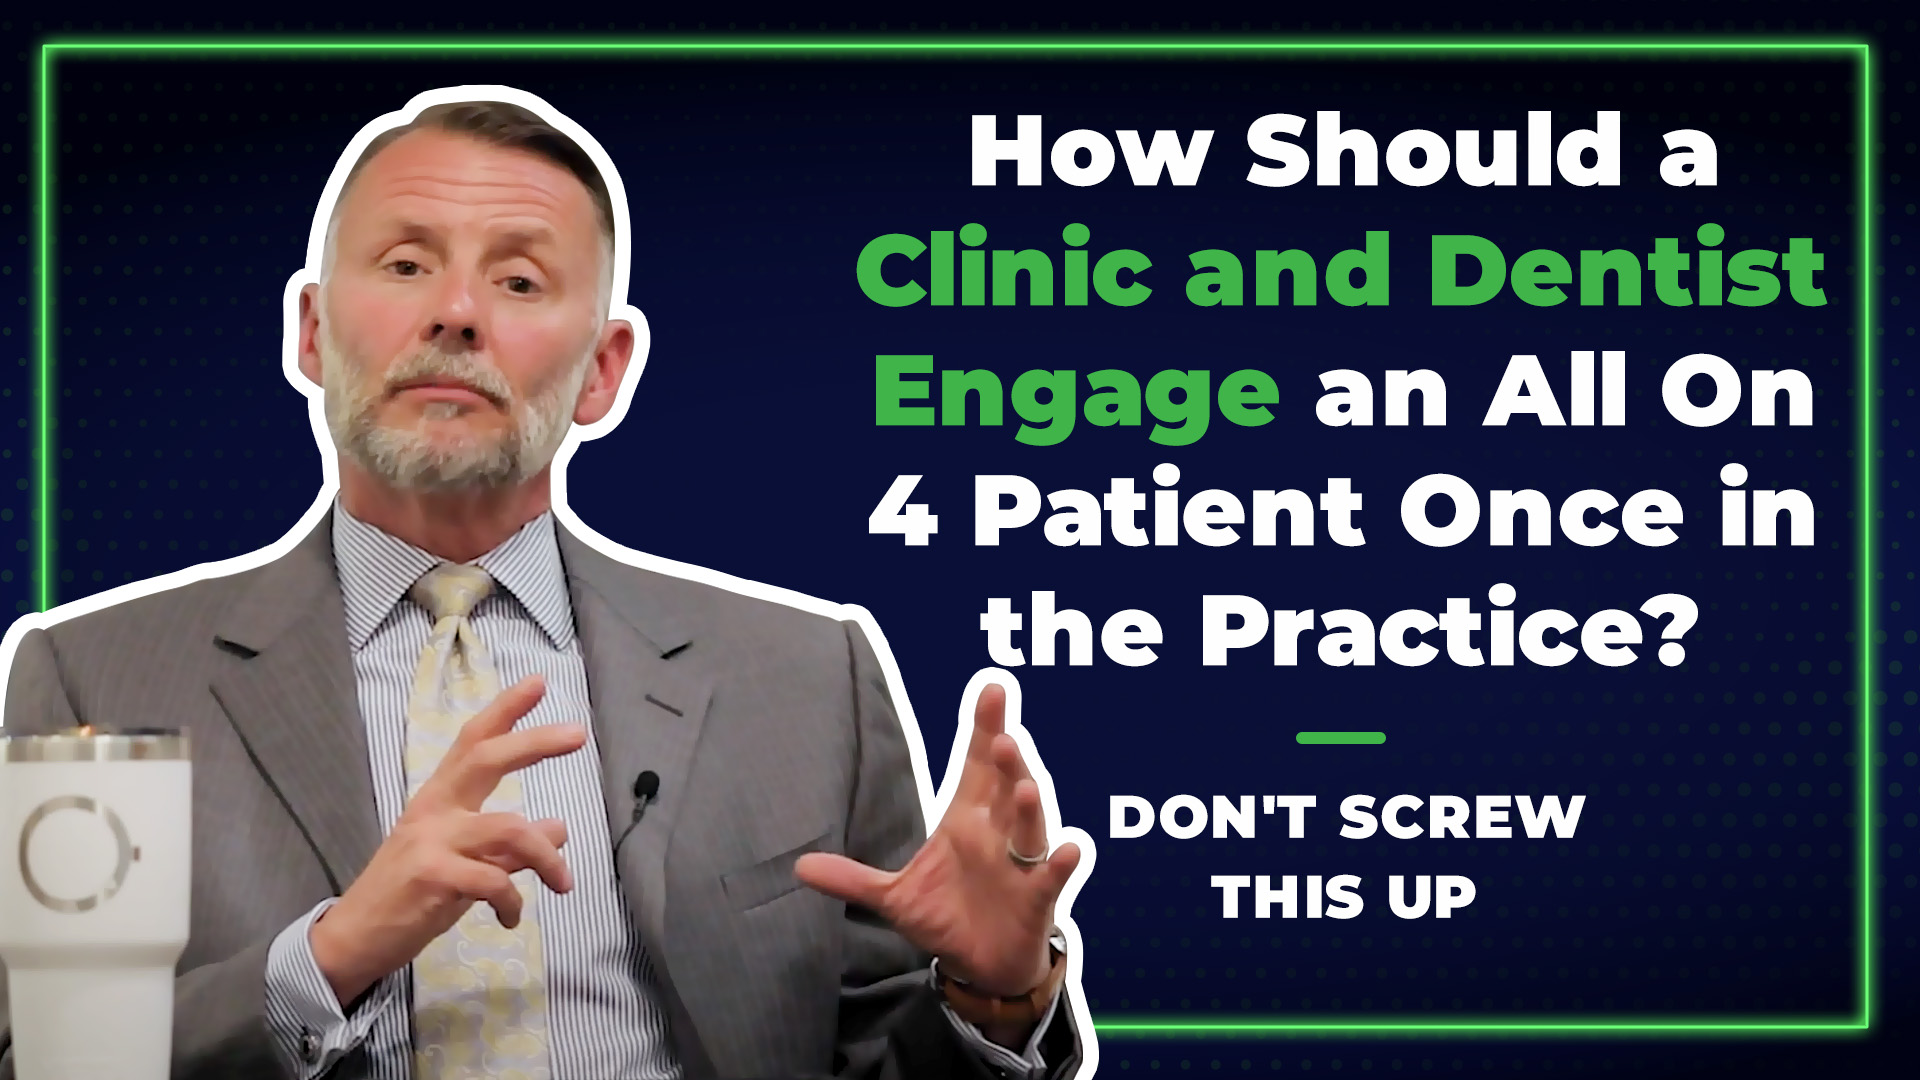 Tools to grow your practice | How Should a Clinic and Dentist Engage an All-On-4 Patient Onces in the Practice DONT SCREW THIS UP